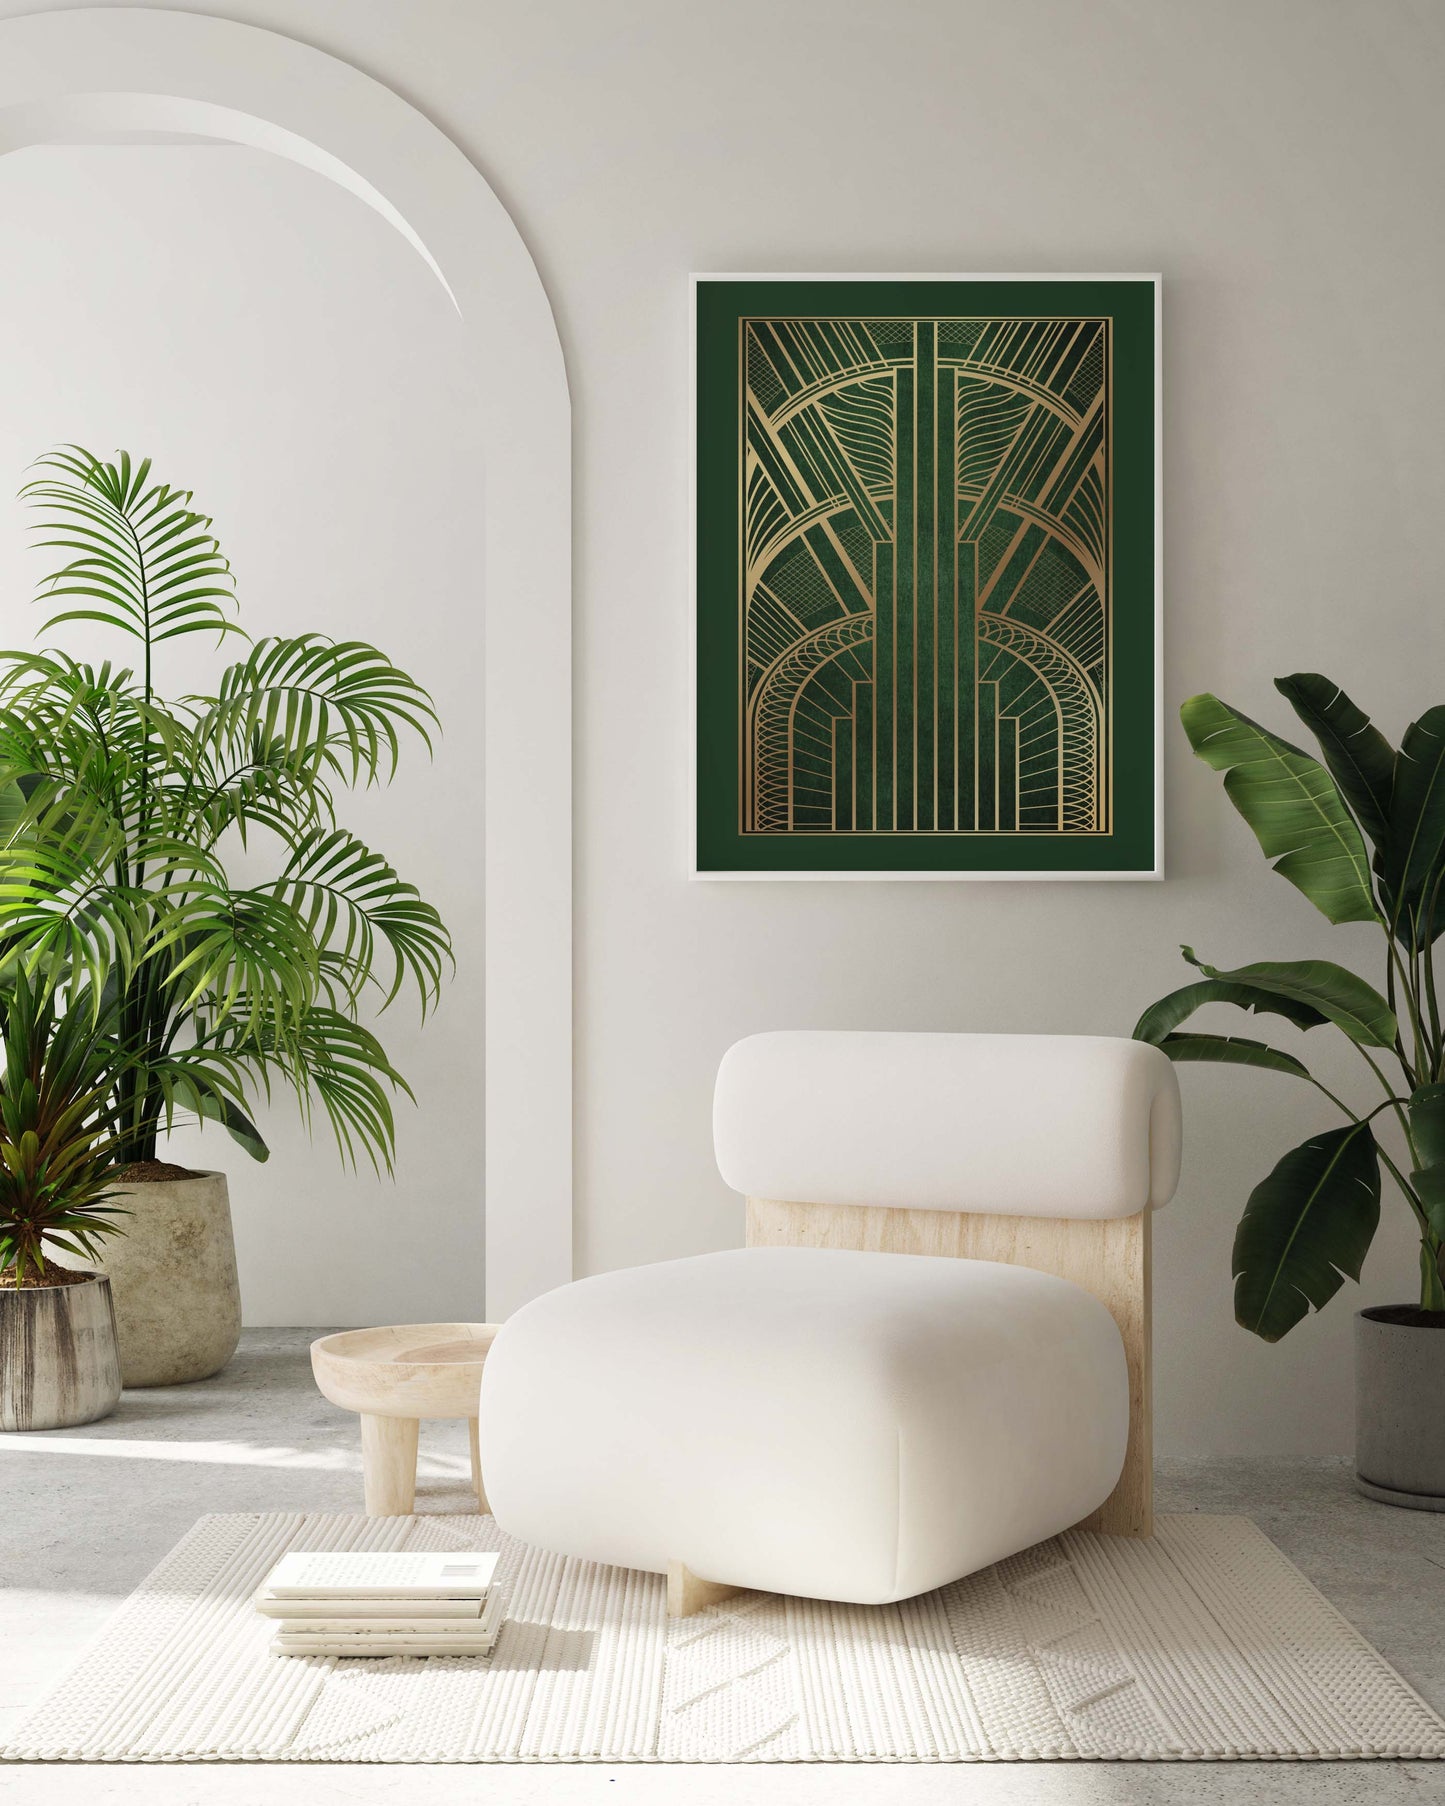 Art deco print in green and gold